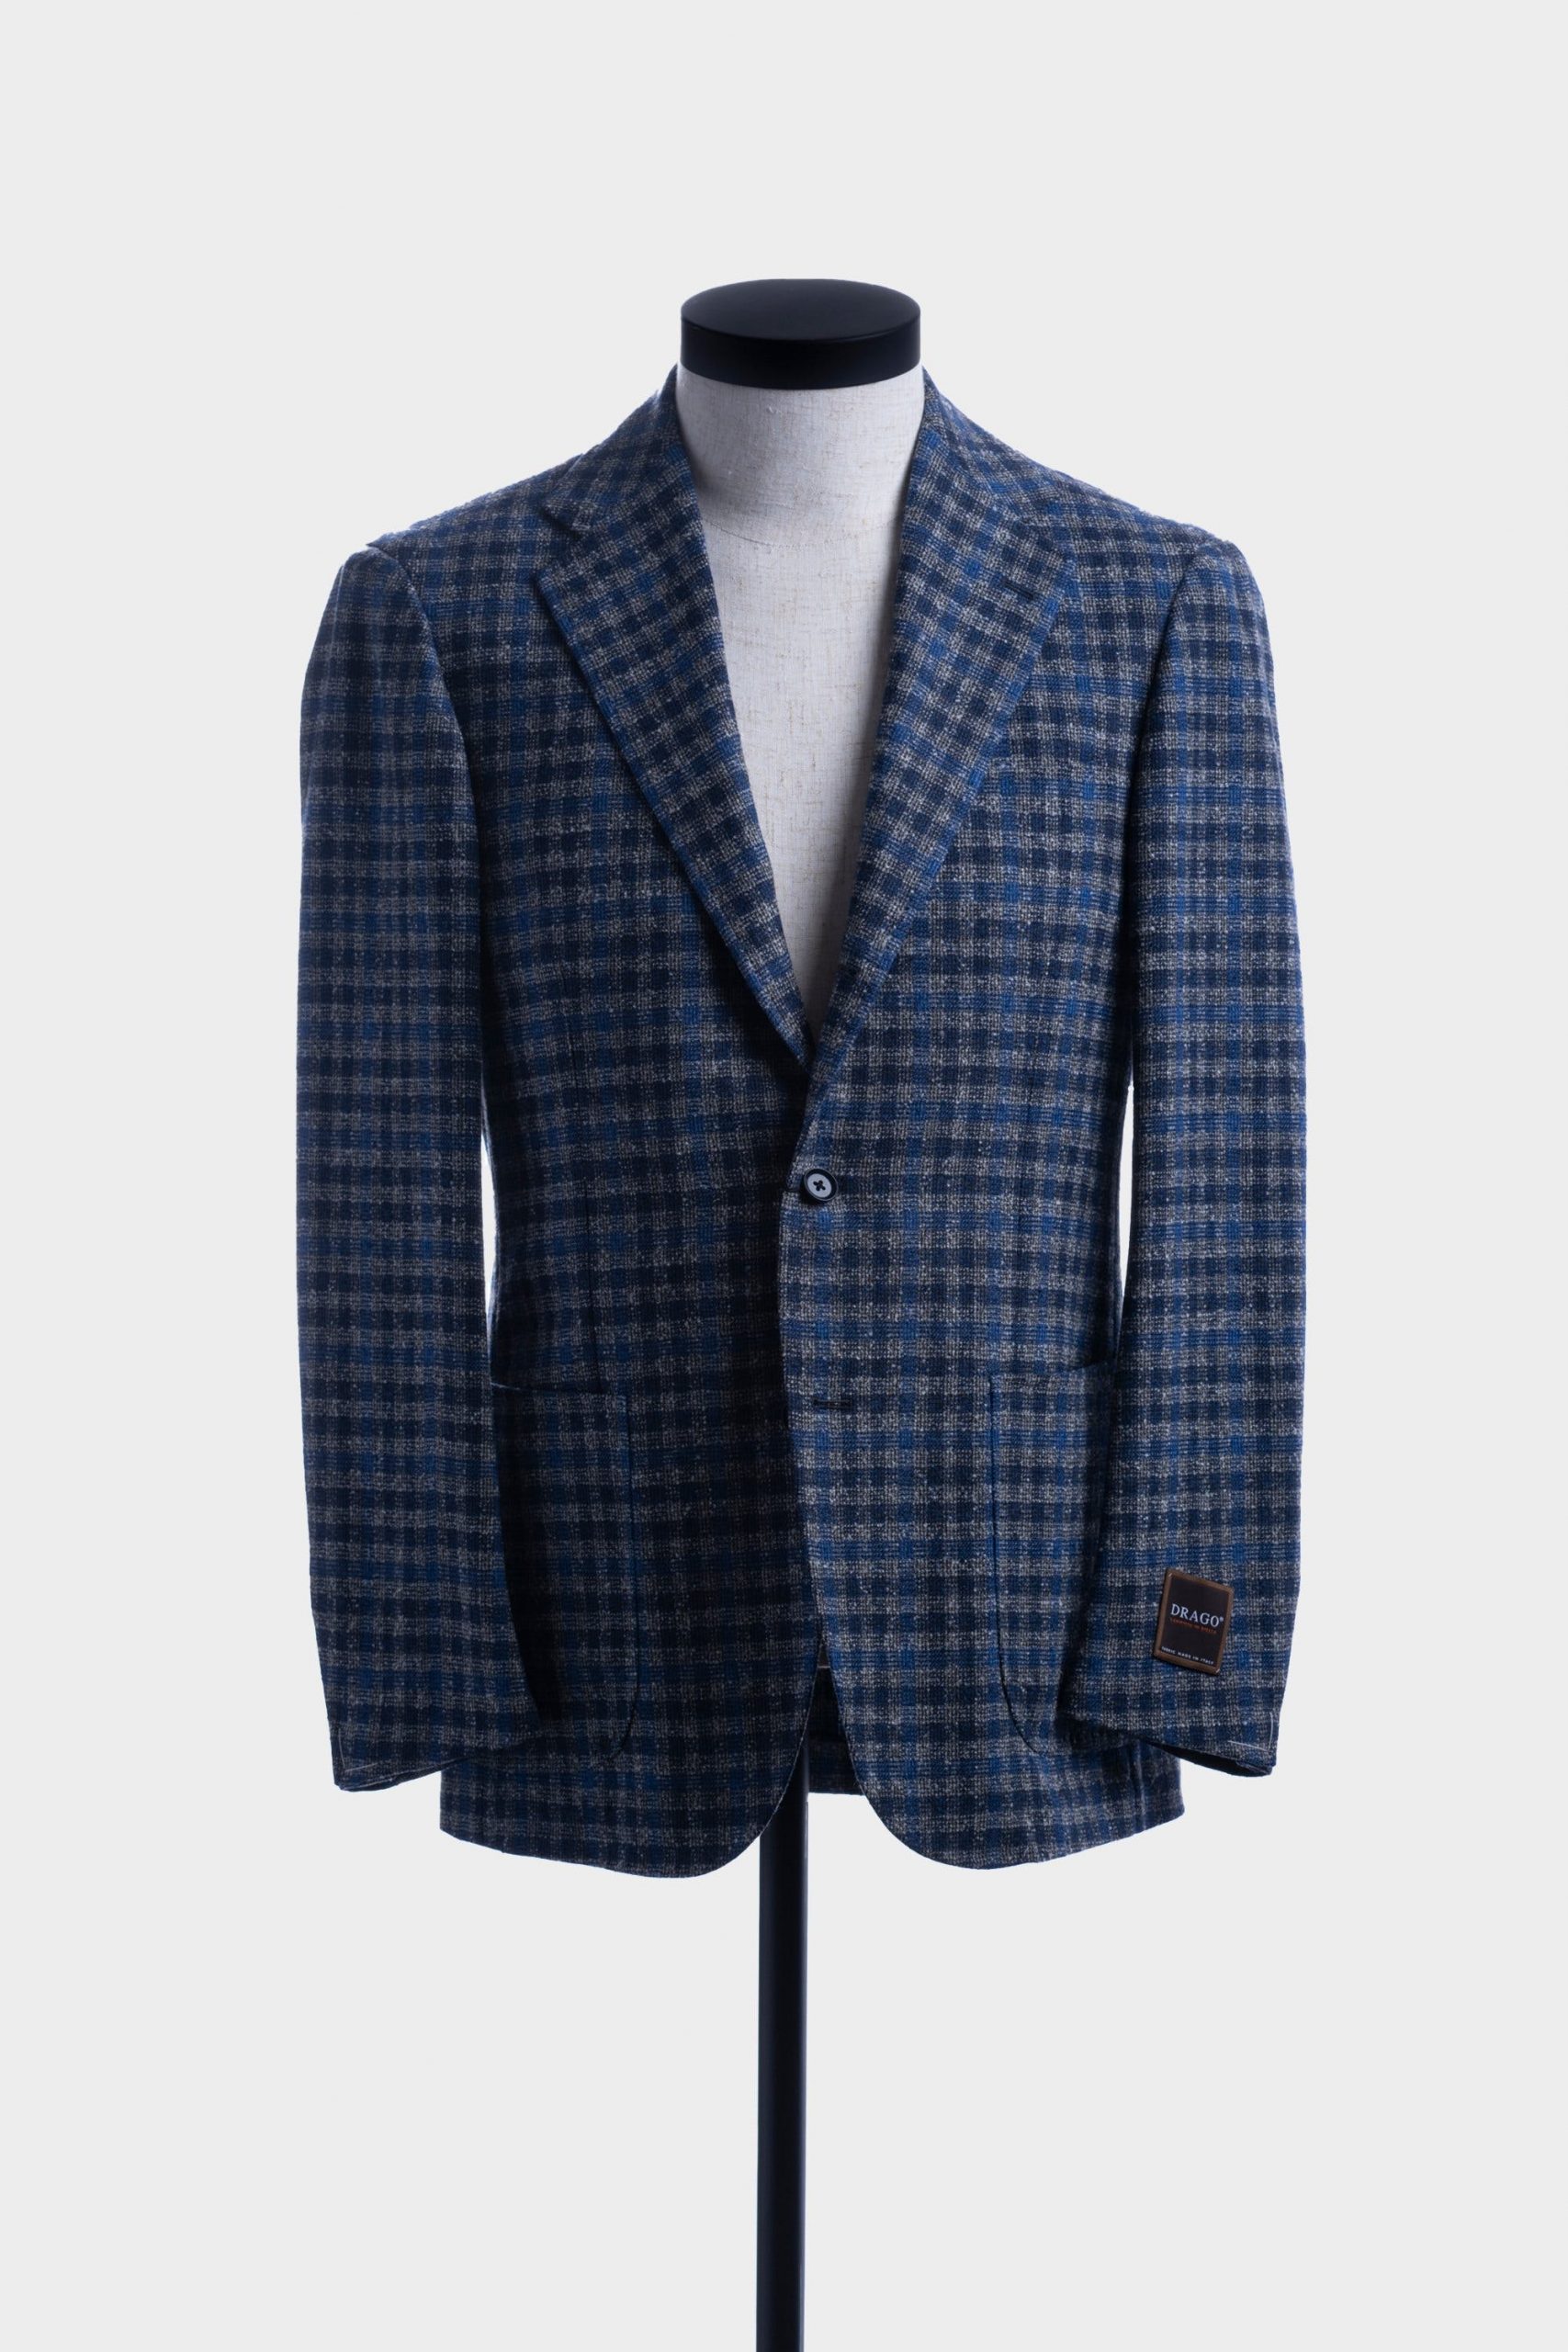 Ring Jacket Clearance Sale – Put This On